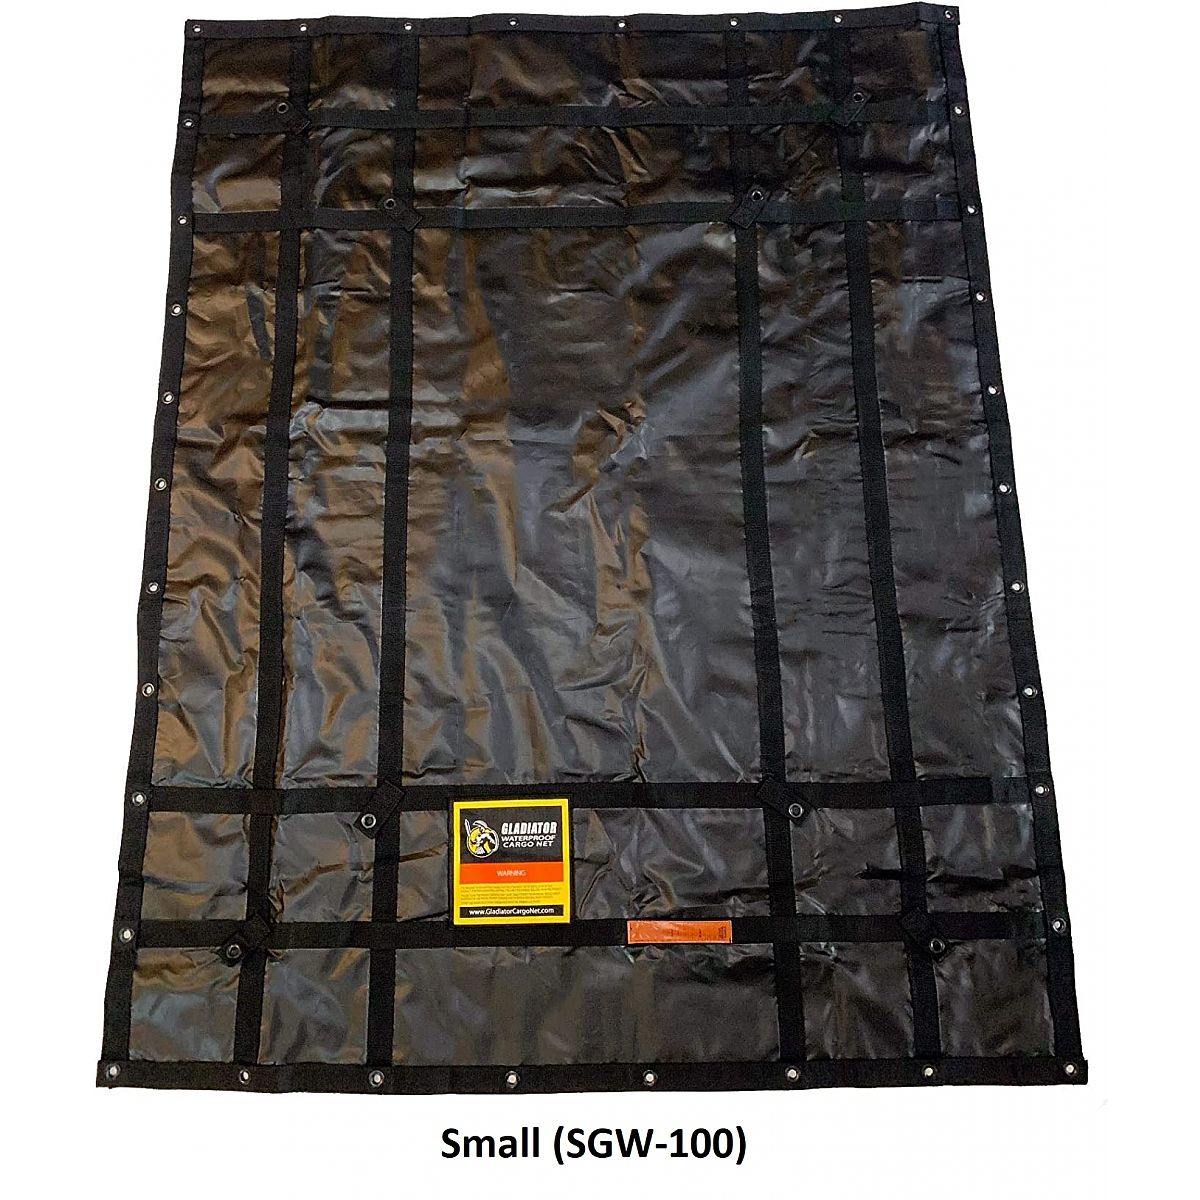 Waterproof Cargo Net for pickup truck beds and trailers by Graham